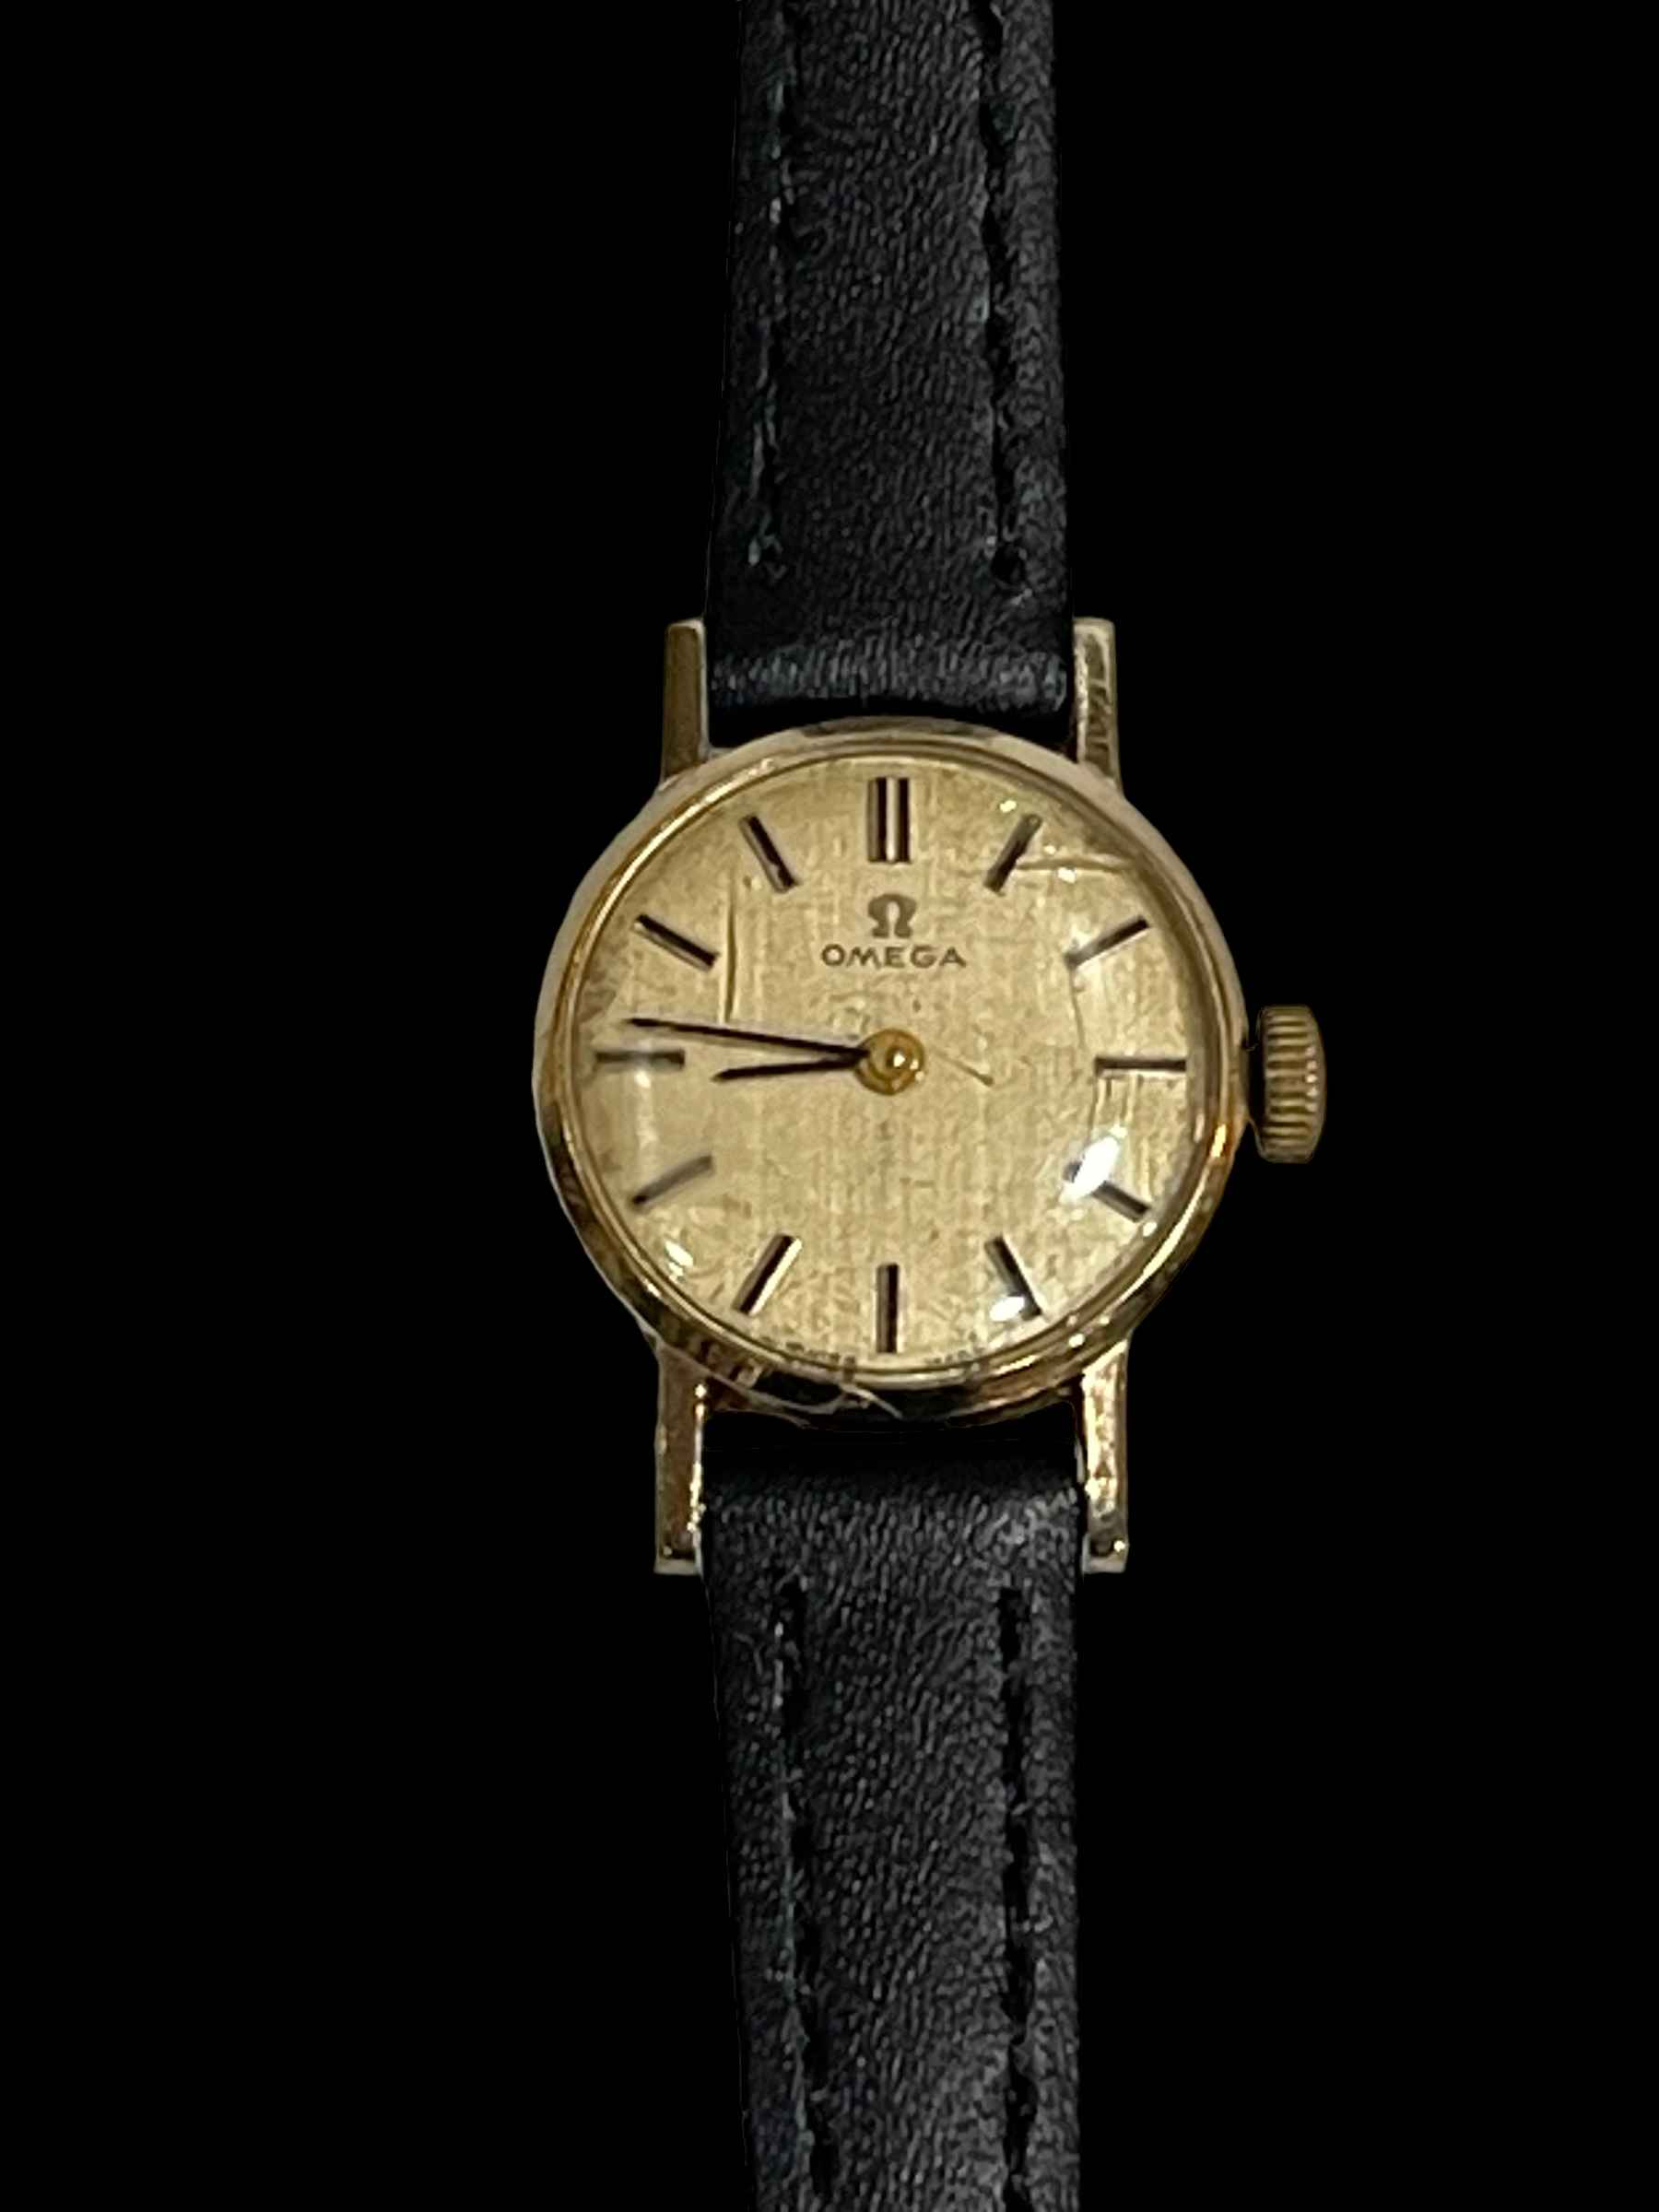 Ladies Omega gold wristwatch with leather strap. - Image 2 of 2